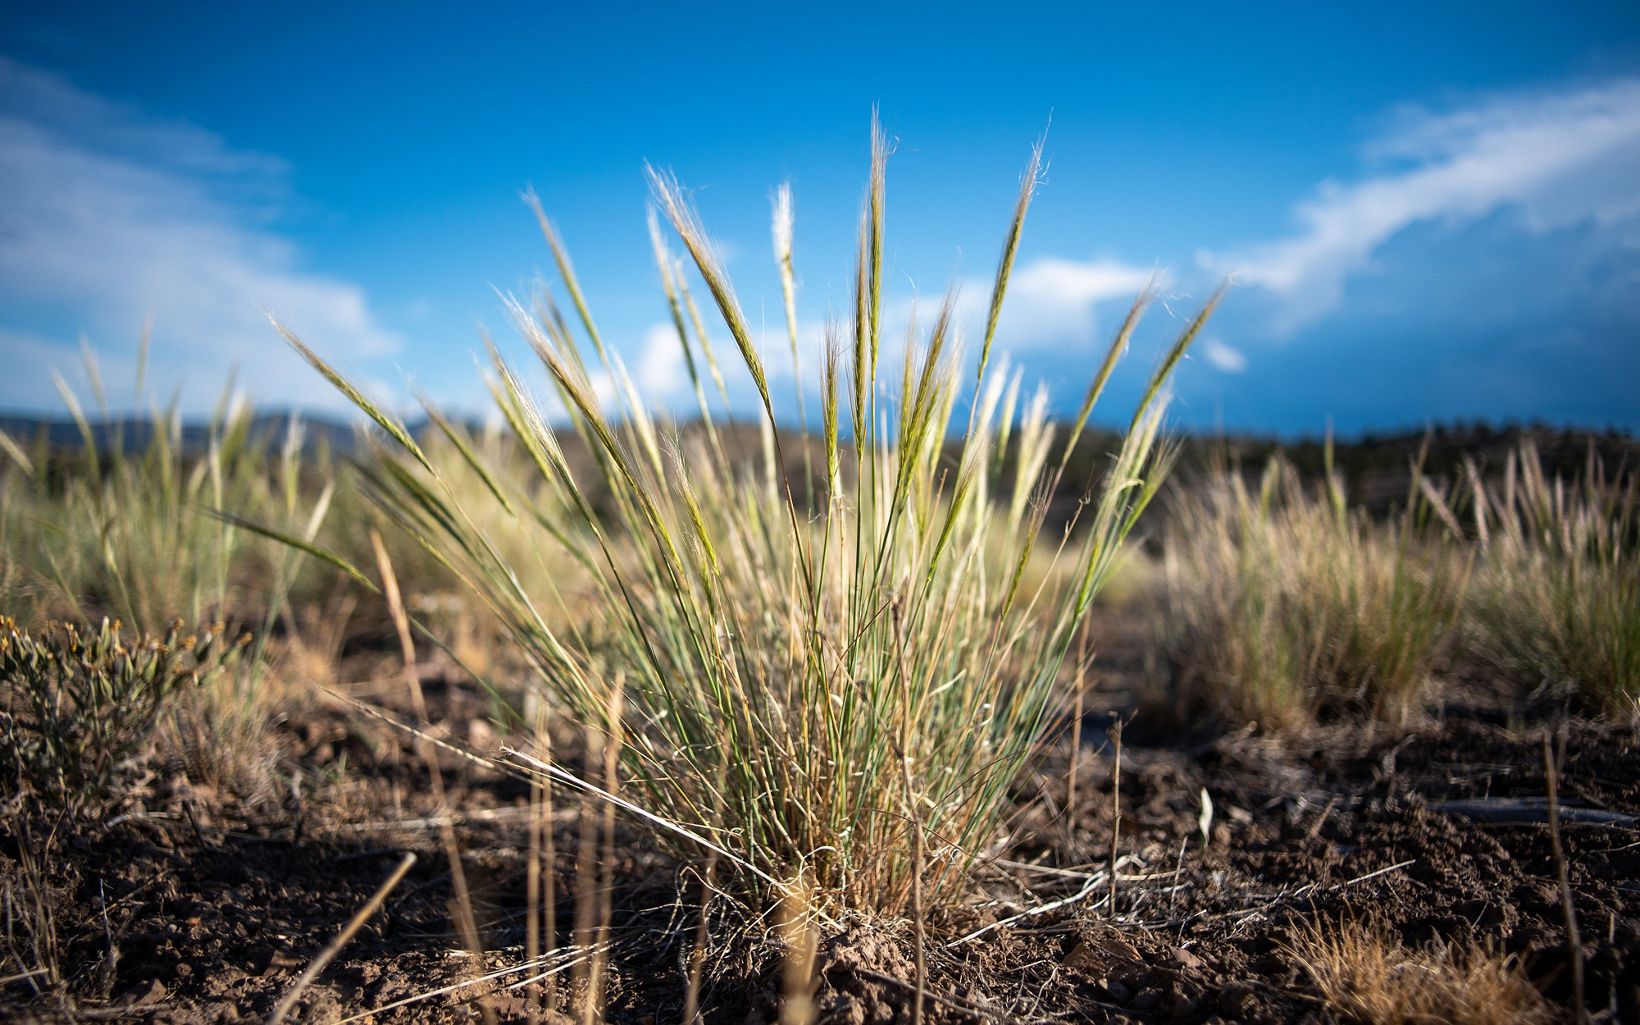 Closeup of grass cluster on sagebrush steppe with blue sky overhead.